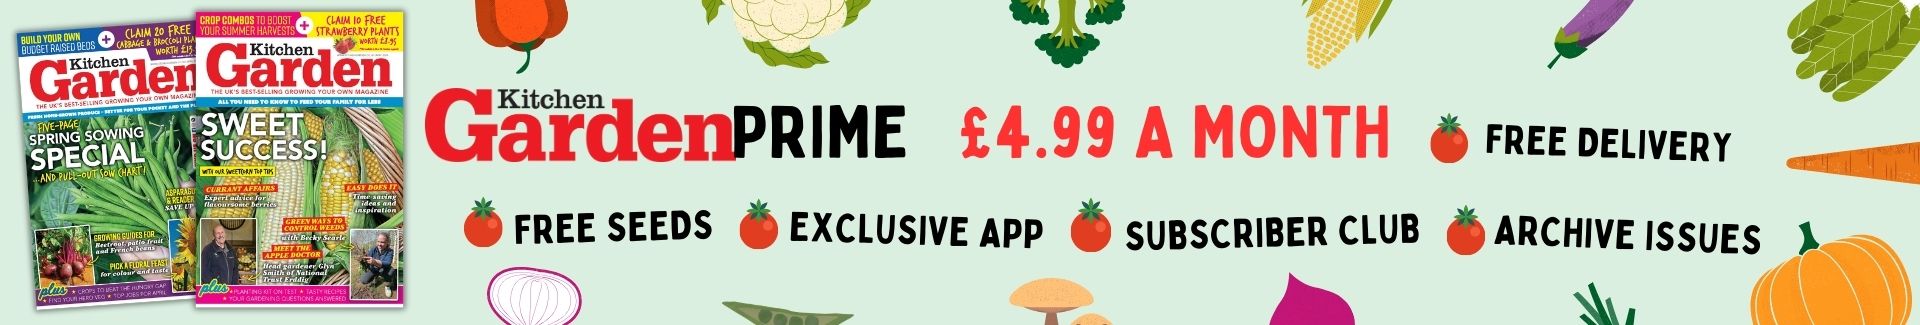 Kitchen Garden Prime - £4.99 - Seeds, print and digital issues, Mudketeers' club, Archive, Forum!